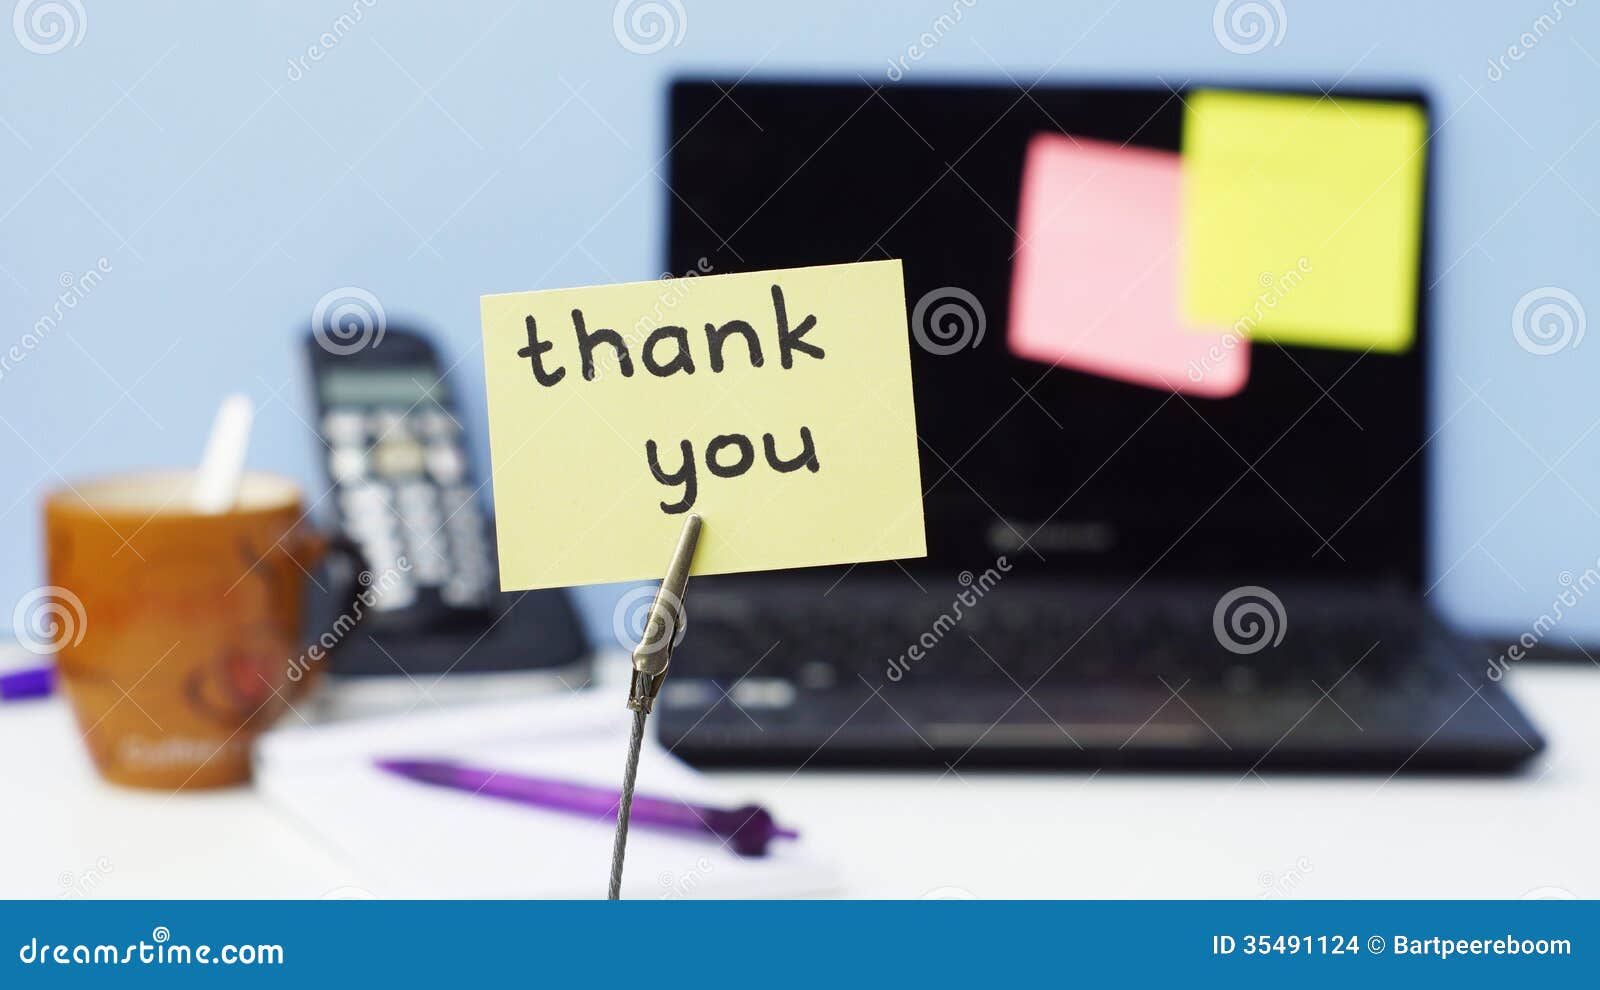 Thank you at the office stock photo. Image of office - 35491124